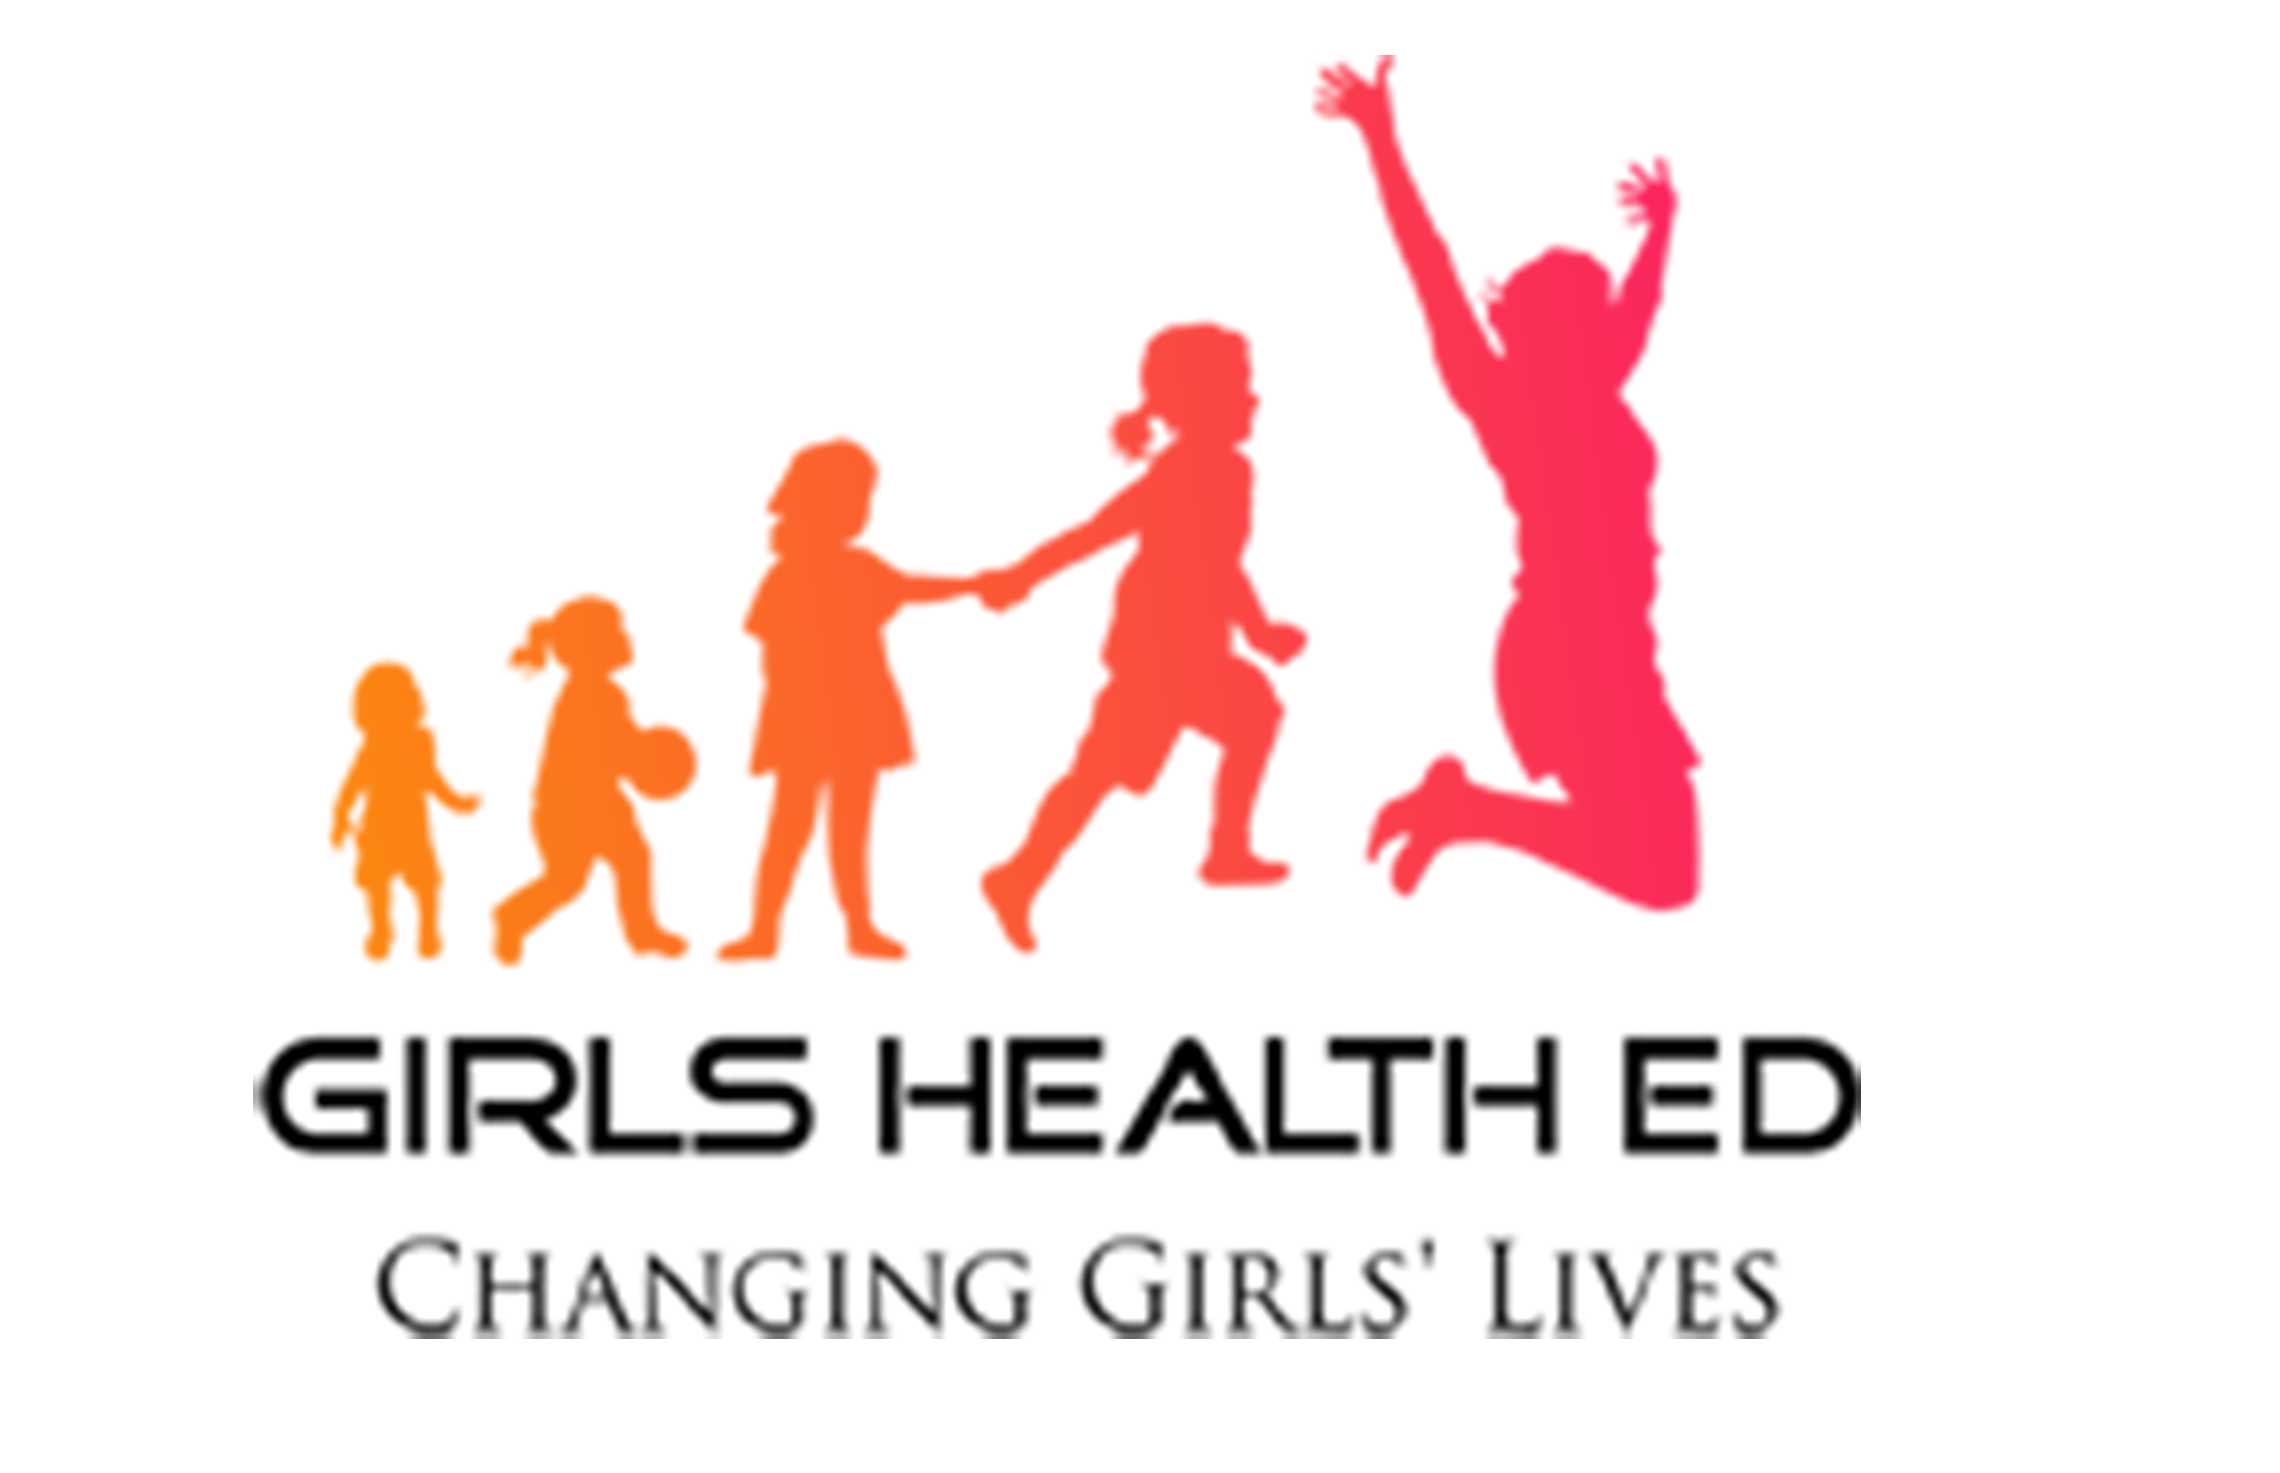 Girls Health Ed logo - orange-yellow ombre silhouettes of a growing girl above black text